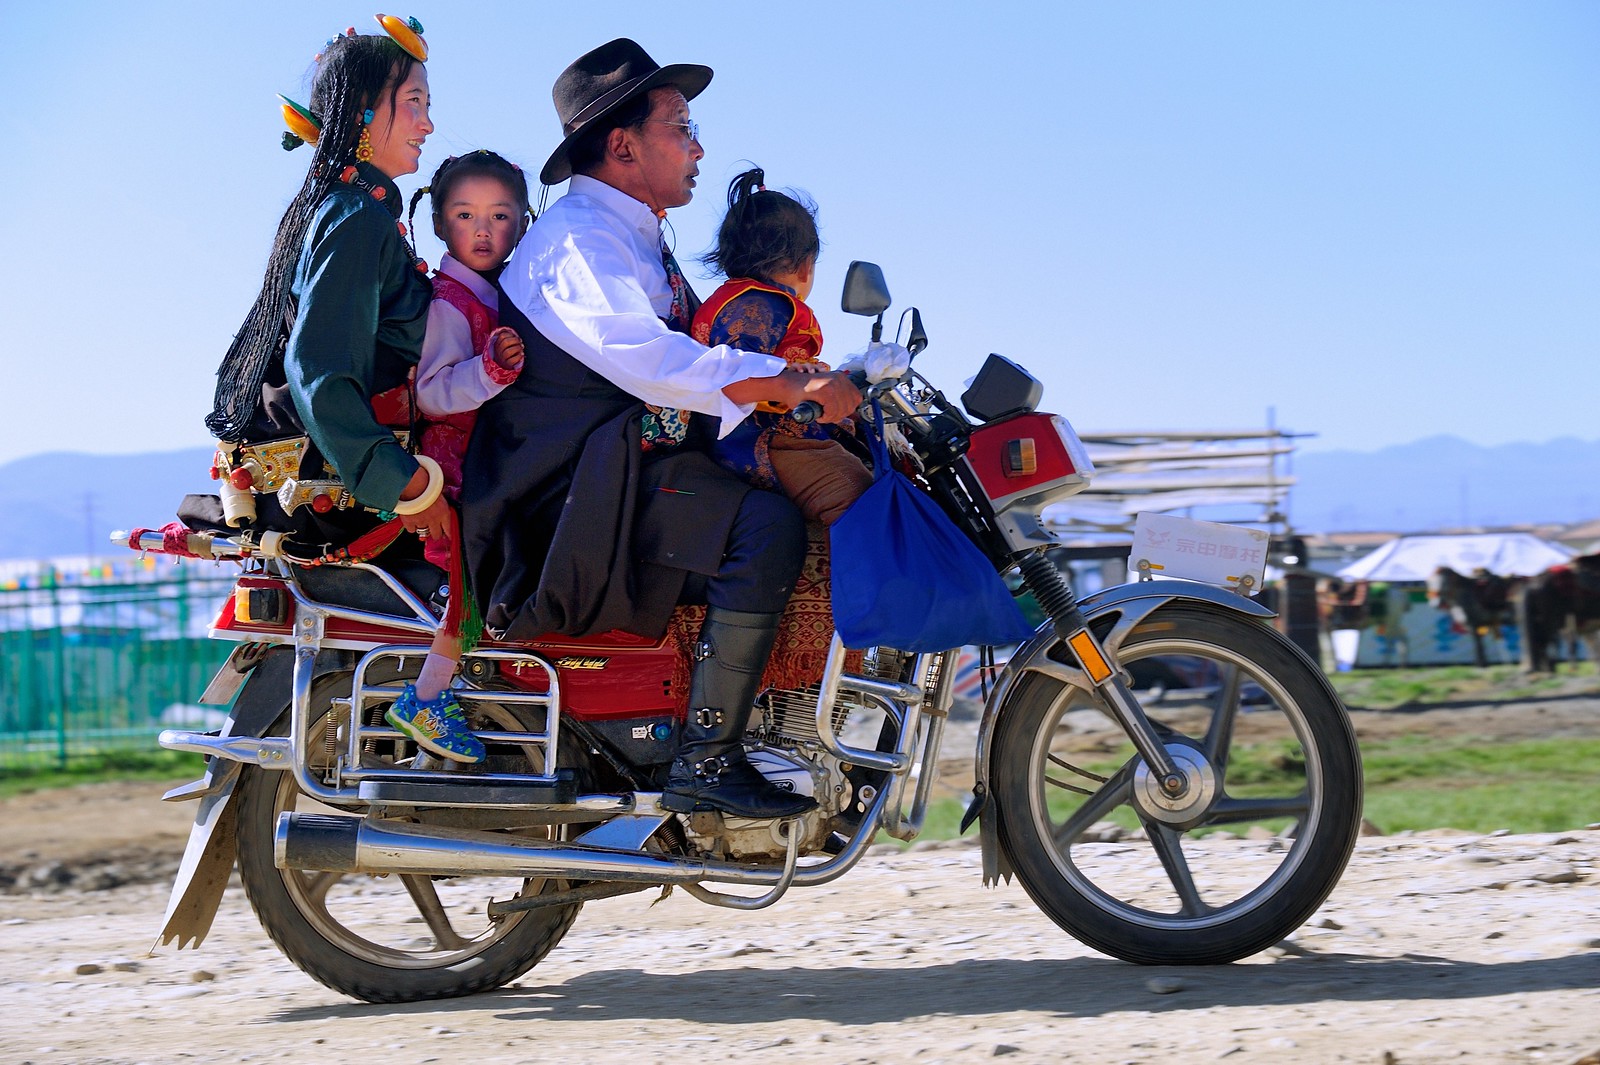 All sizes | Motorbike for the whole family, Tibet 2014 | Flickr - Photo ...